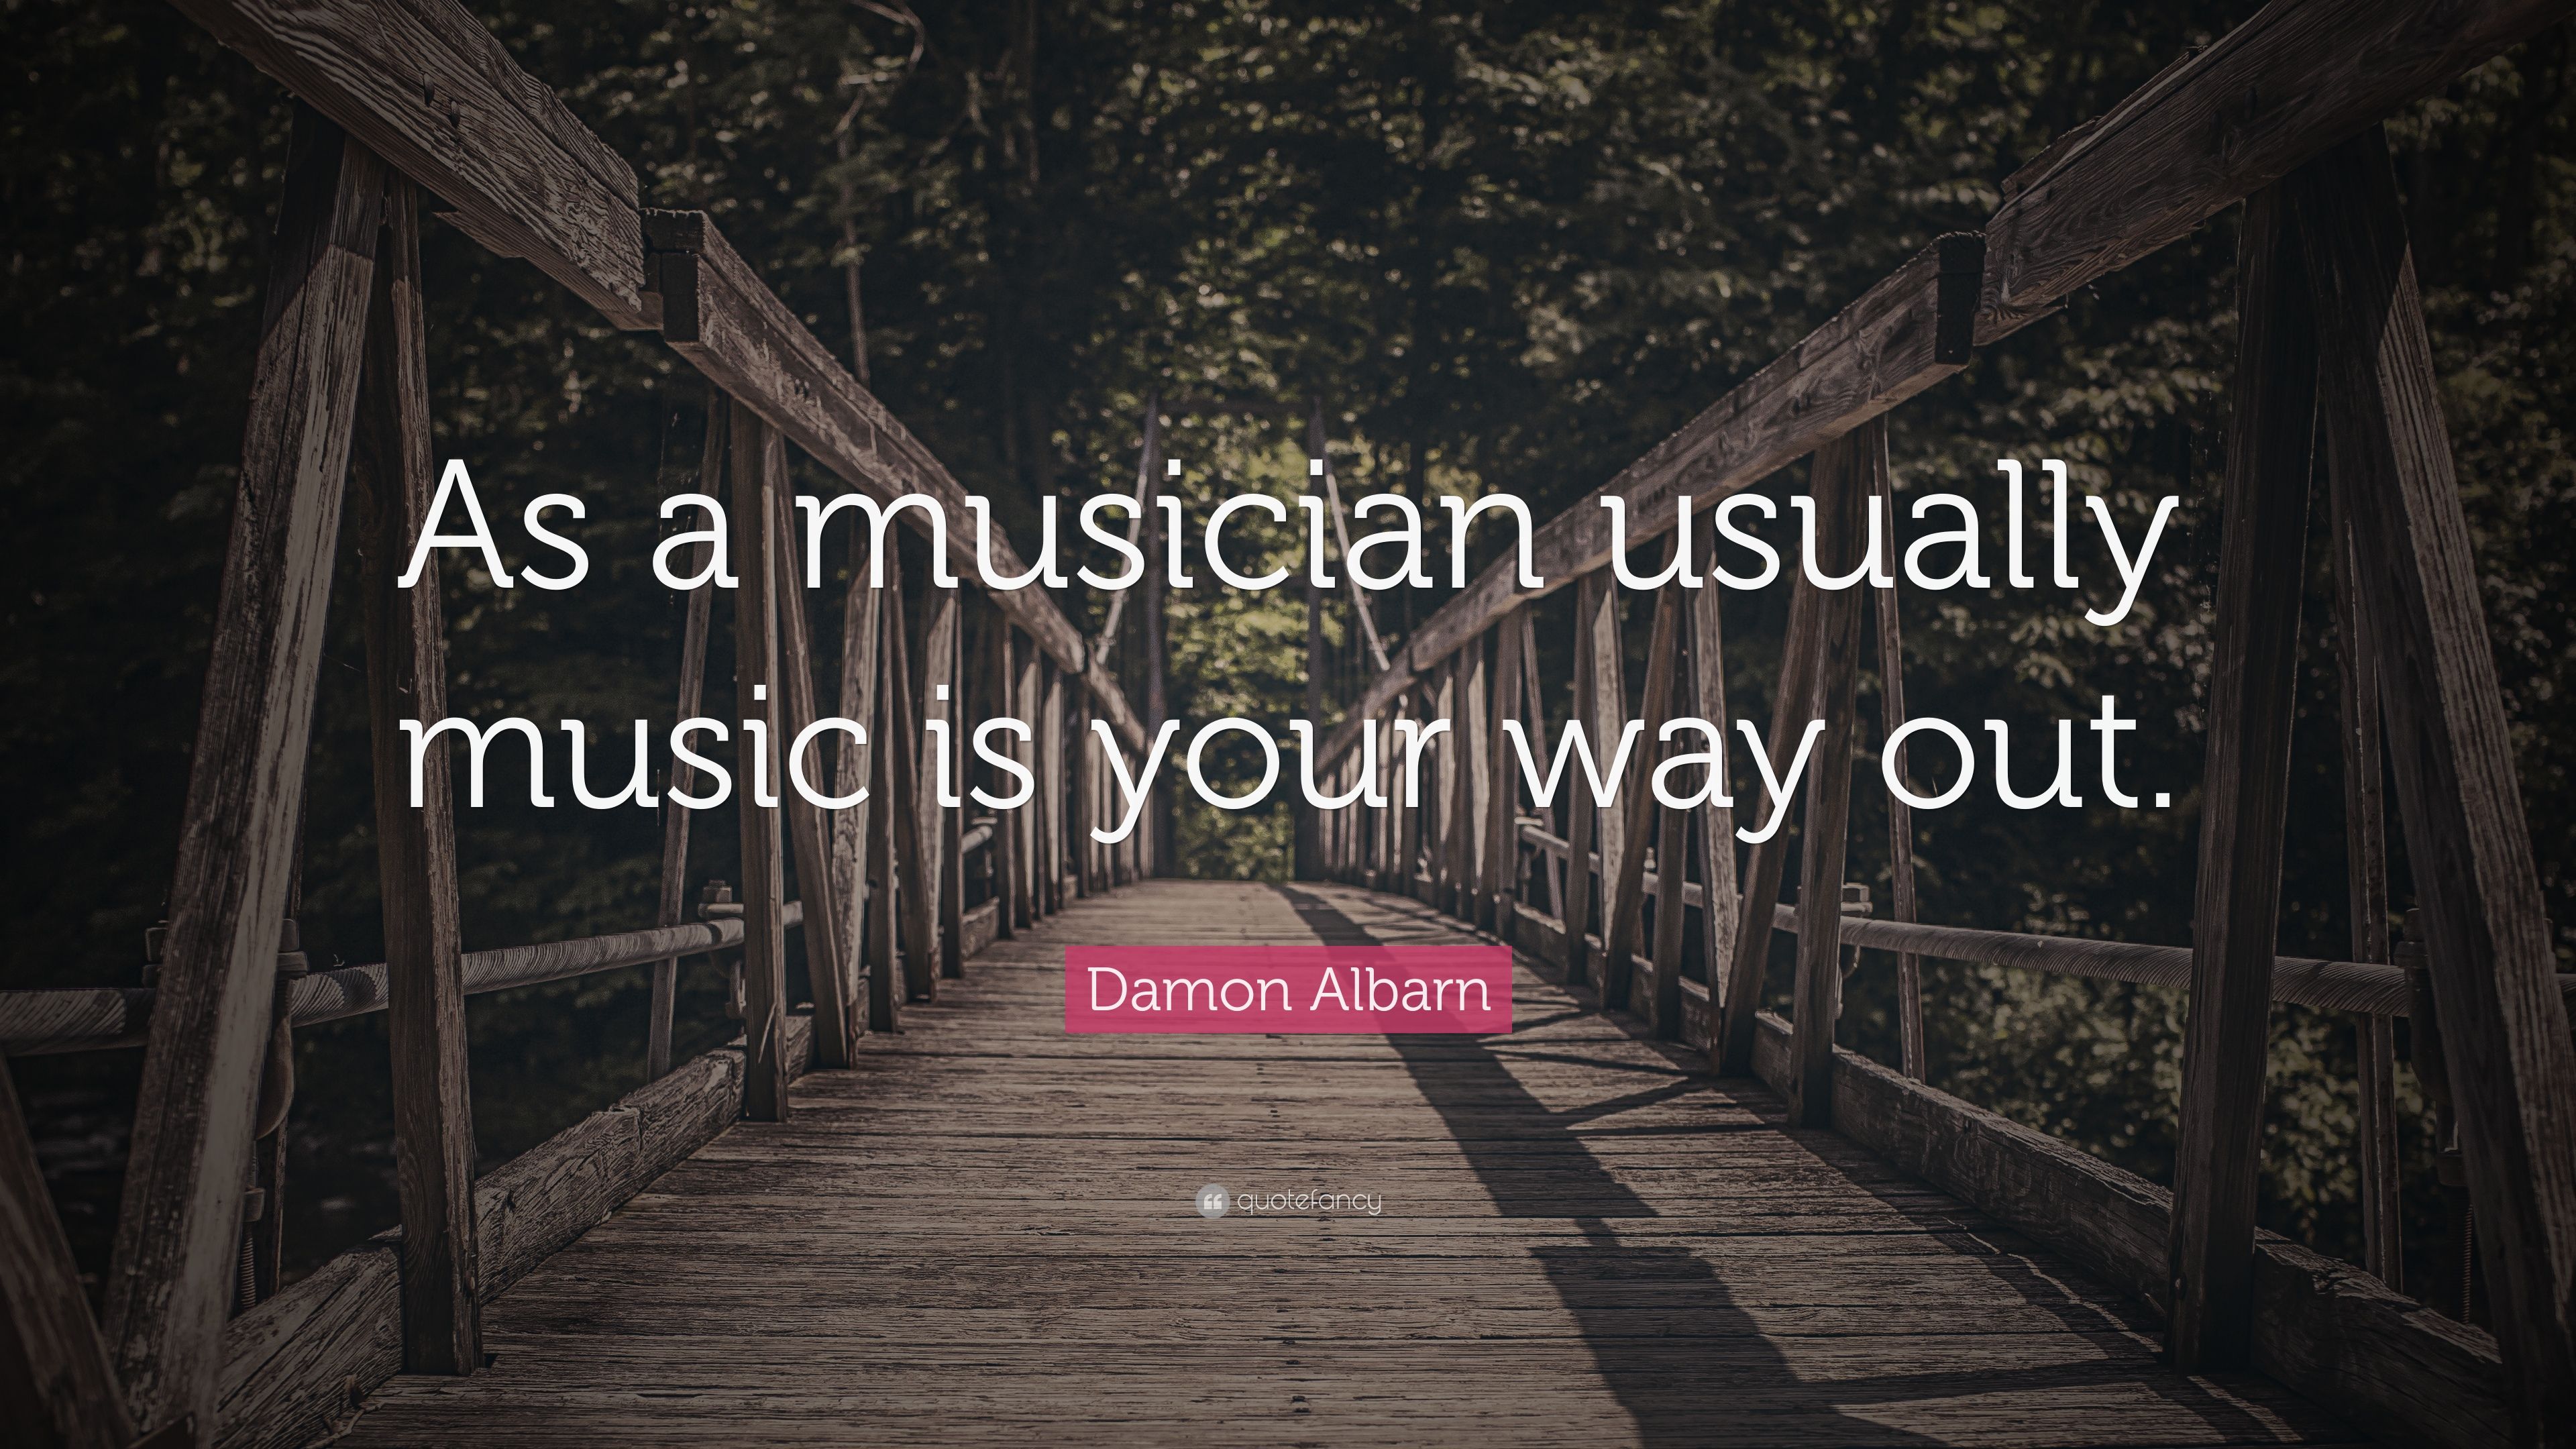 Damon Albarn Quote: “As a musician usually music is your way out